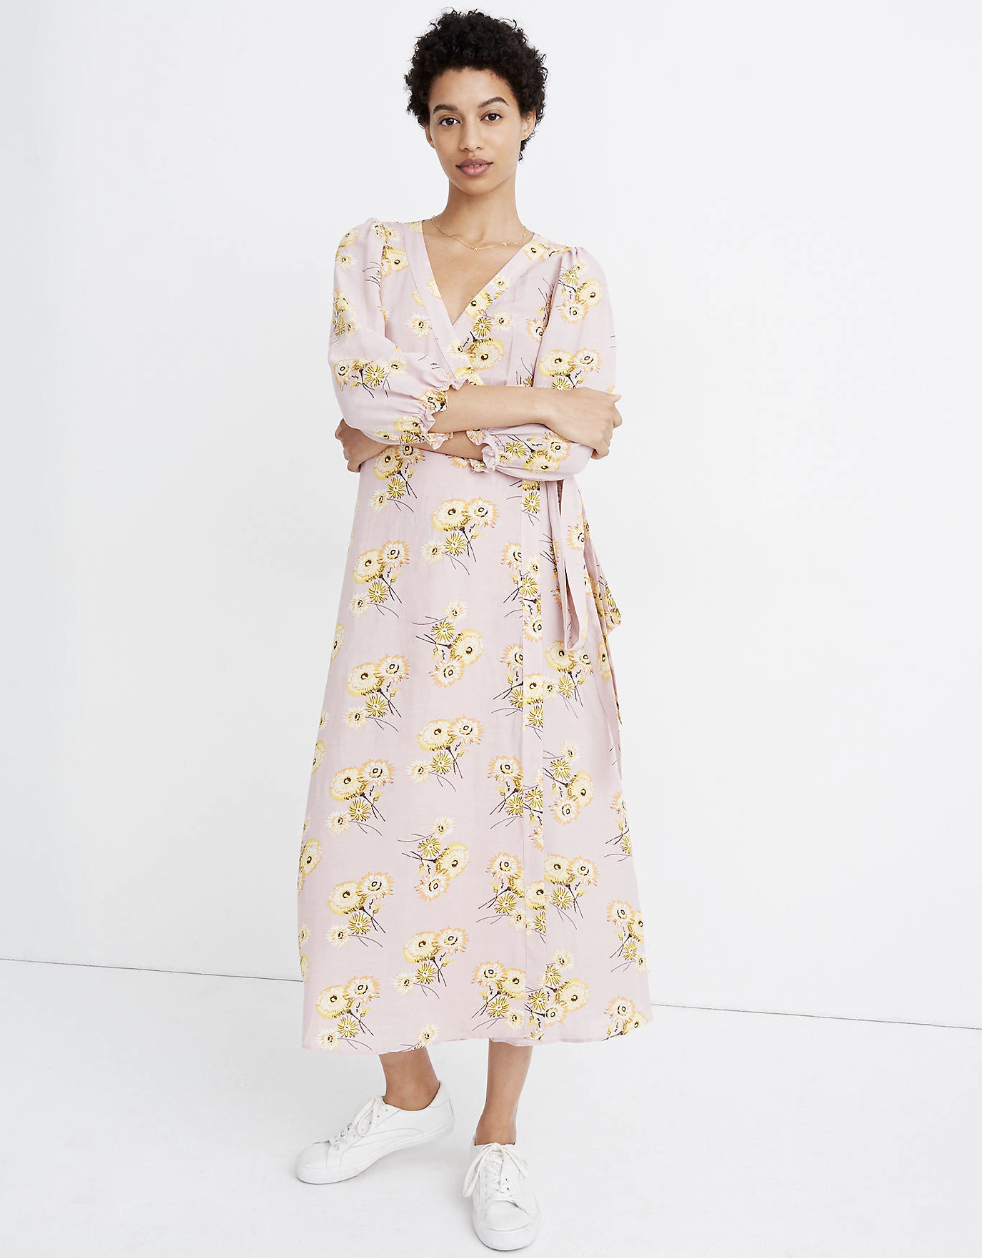 A model in a pale purple flowery wrap dress with 3/4 sleeves that falls above the ankle 